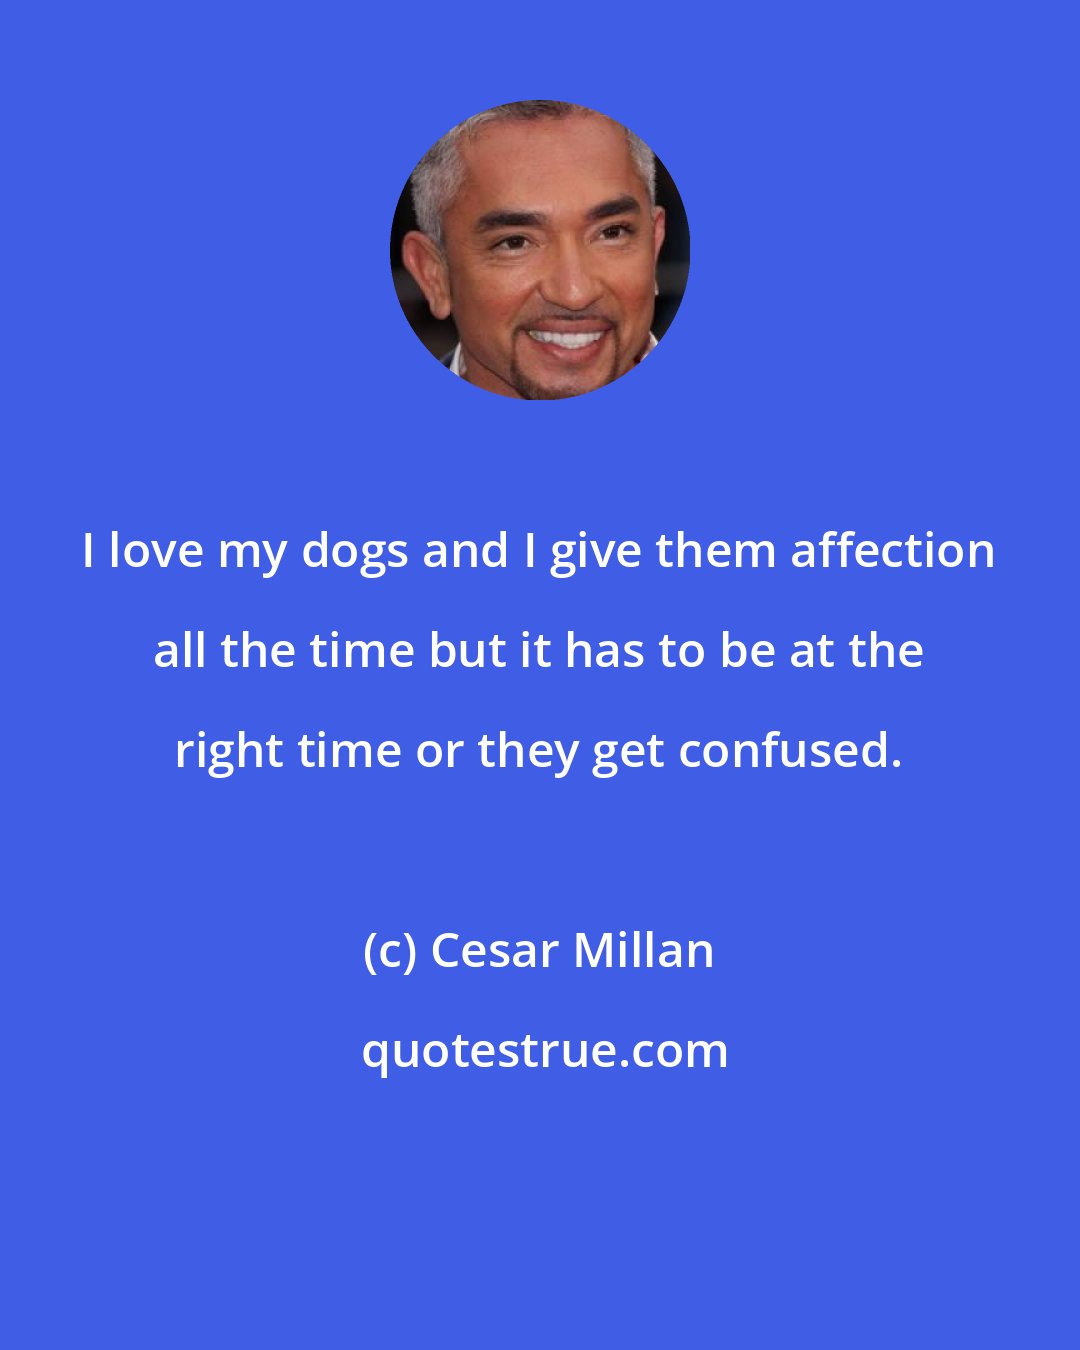 Cesar Millan: I love my dogs and I give them affection all the time but it has to be at the right time or they get confused.